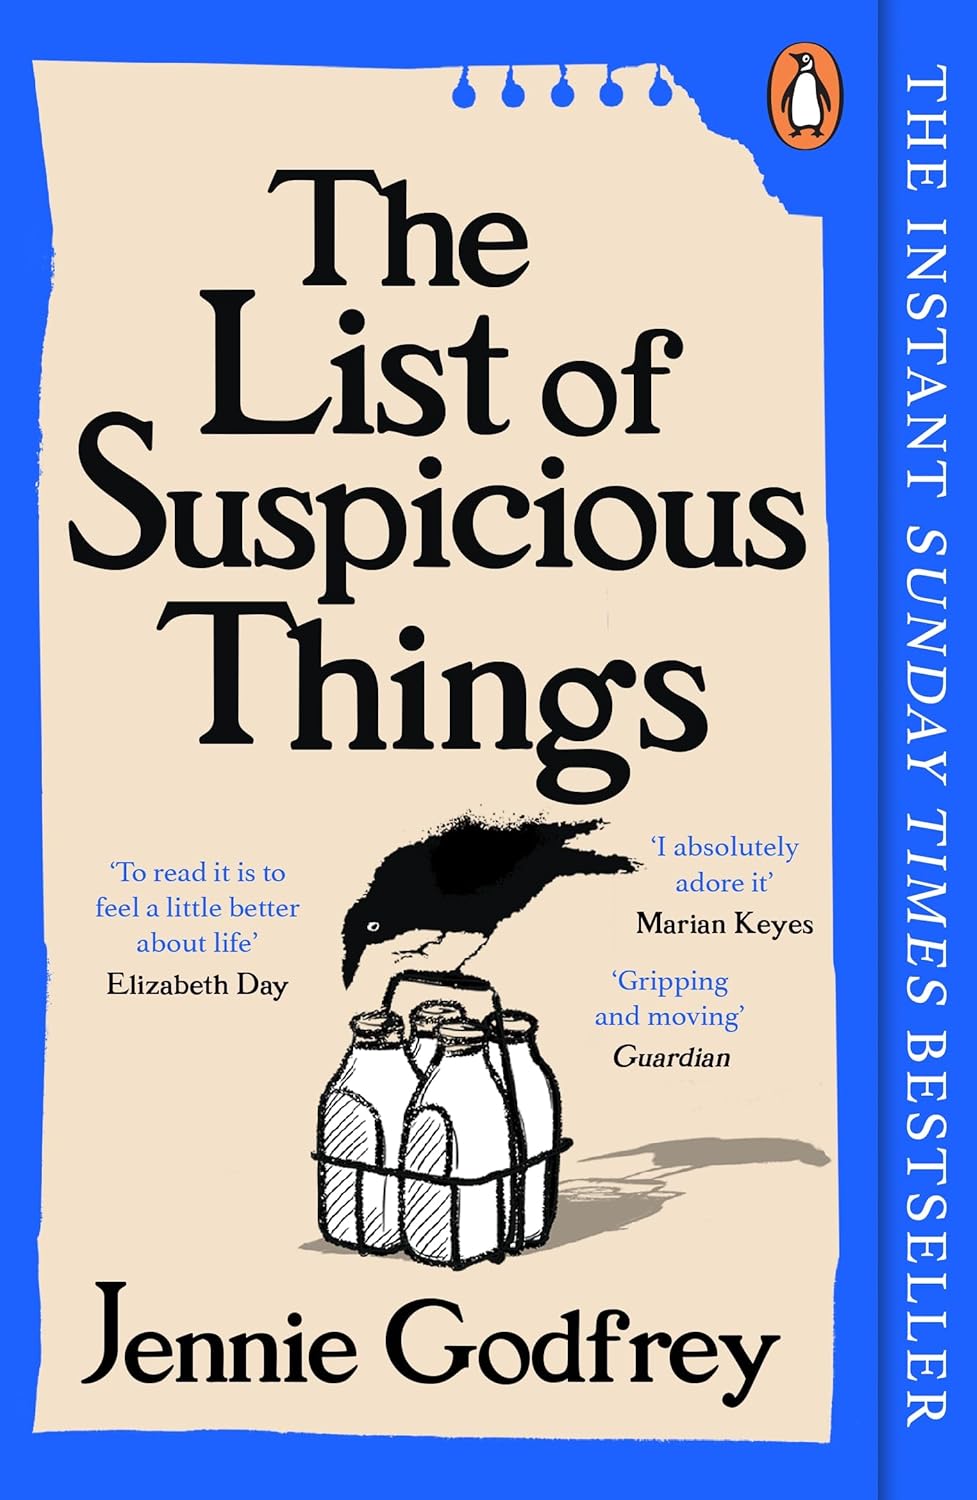 The List of Suspicious Things by Jennie Godfrey